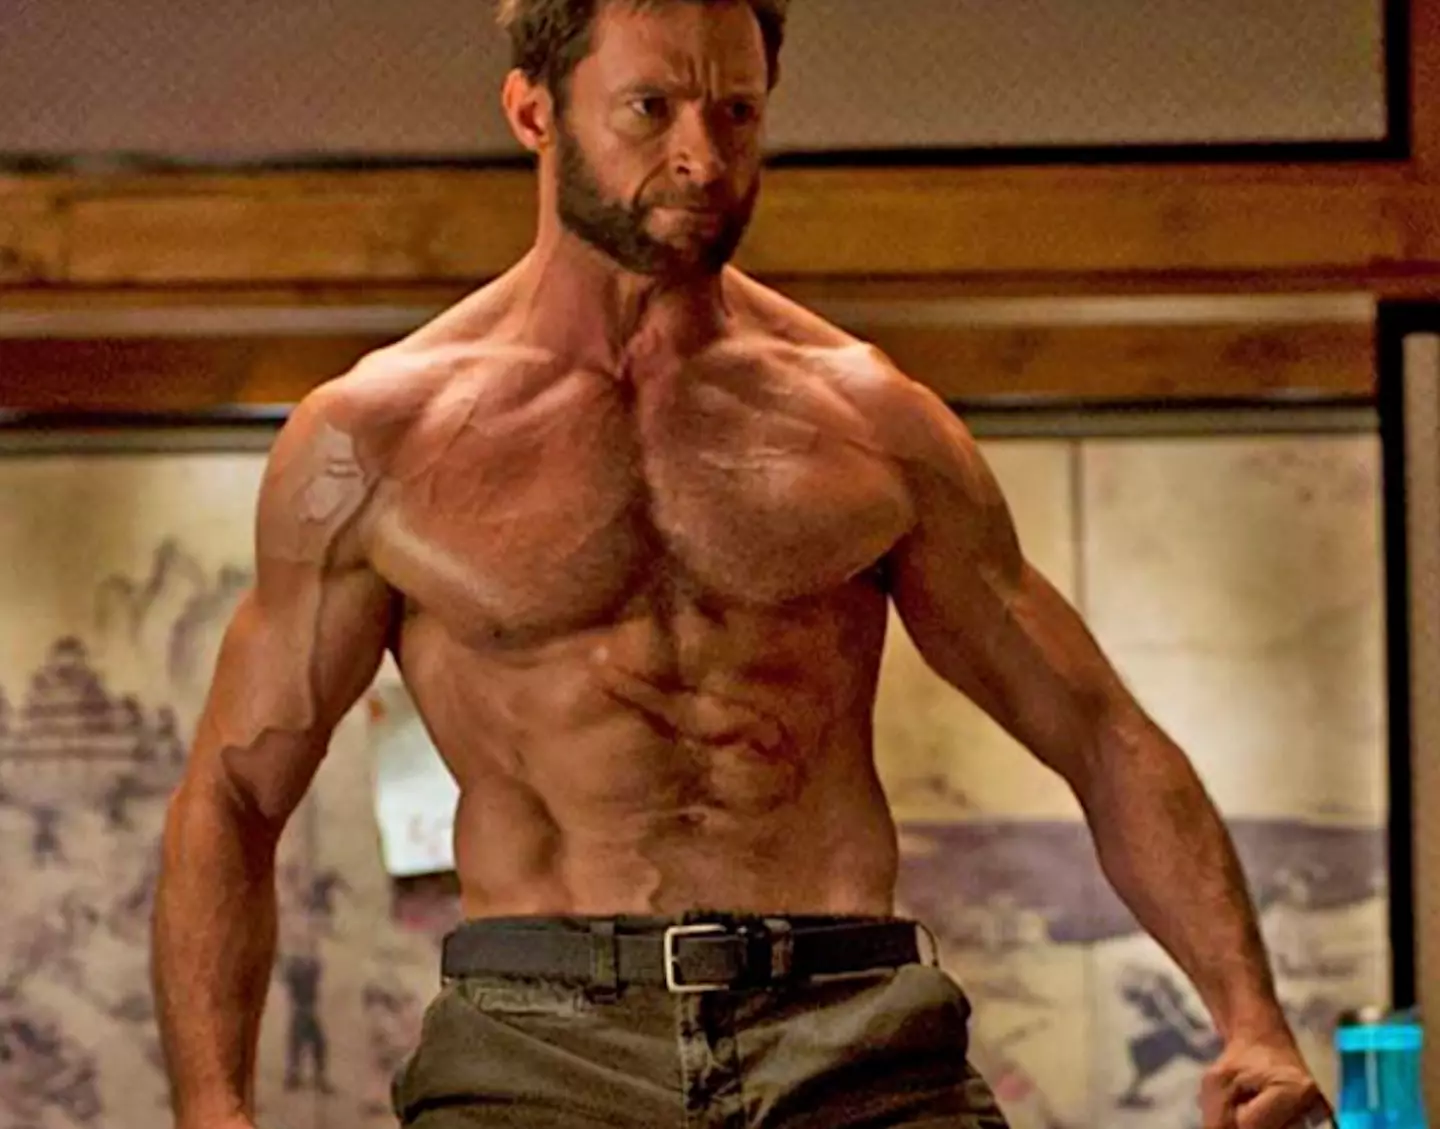 Jackman in 2013's The Wolverine.